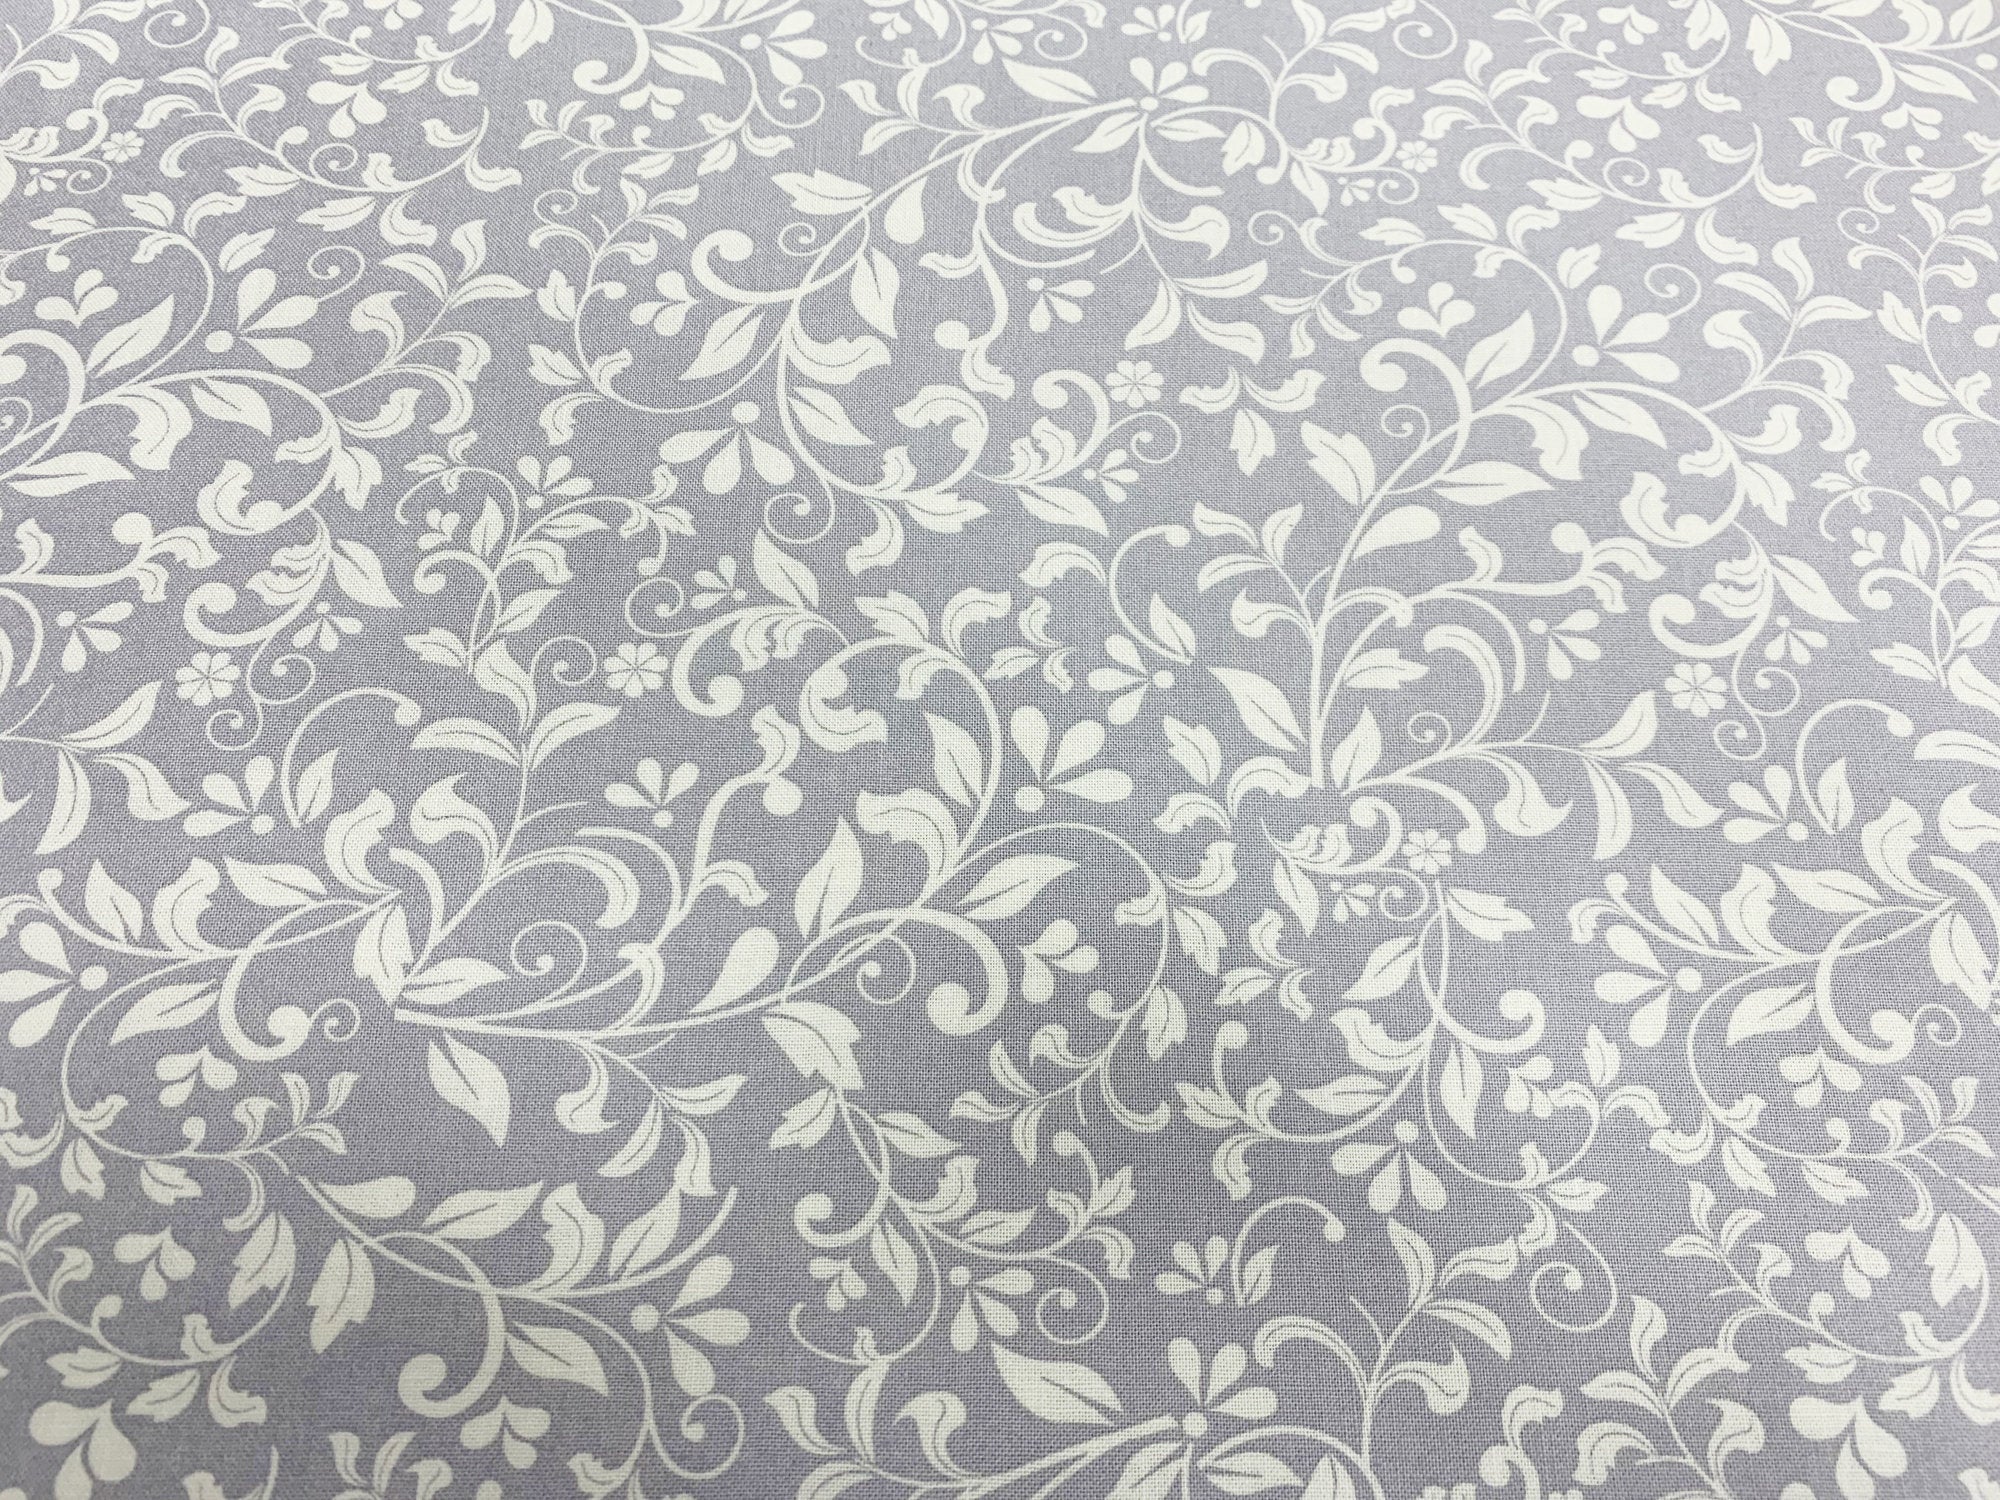 Floral Fabric ~ 100% Cotton Craft Fabric ~ Floral Print ~SILVER GREY & –  House of Haberdashery